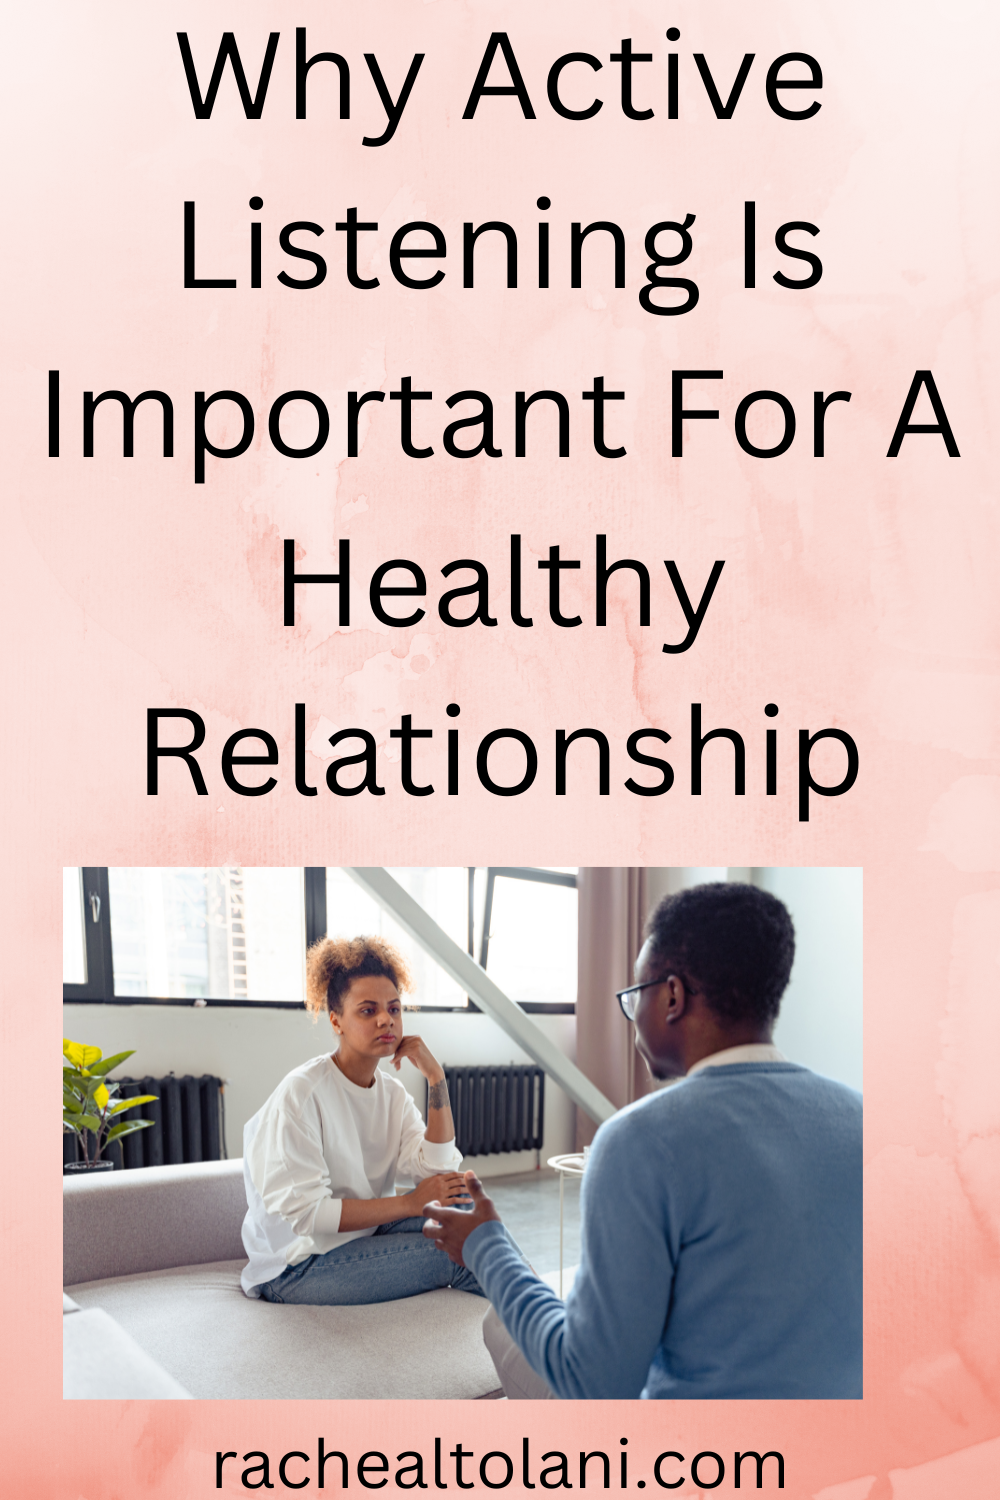 Why active listening is important